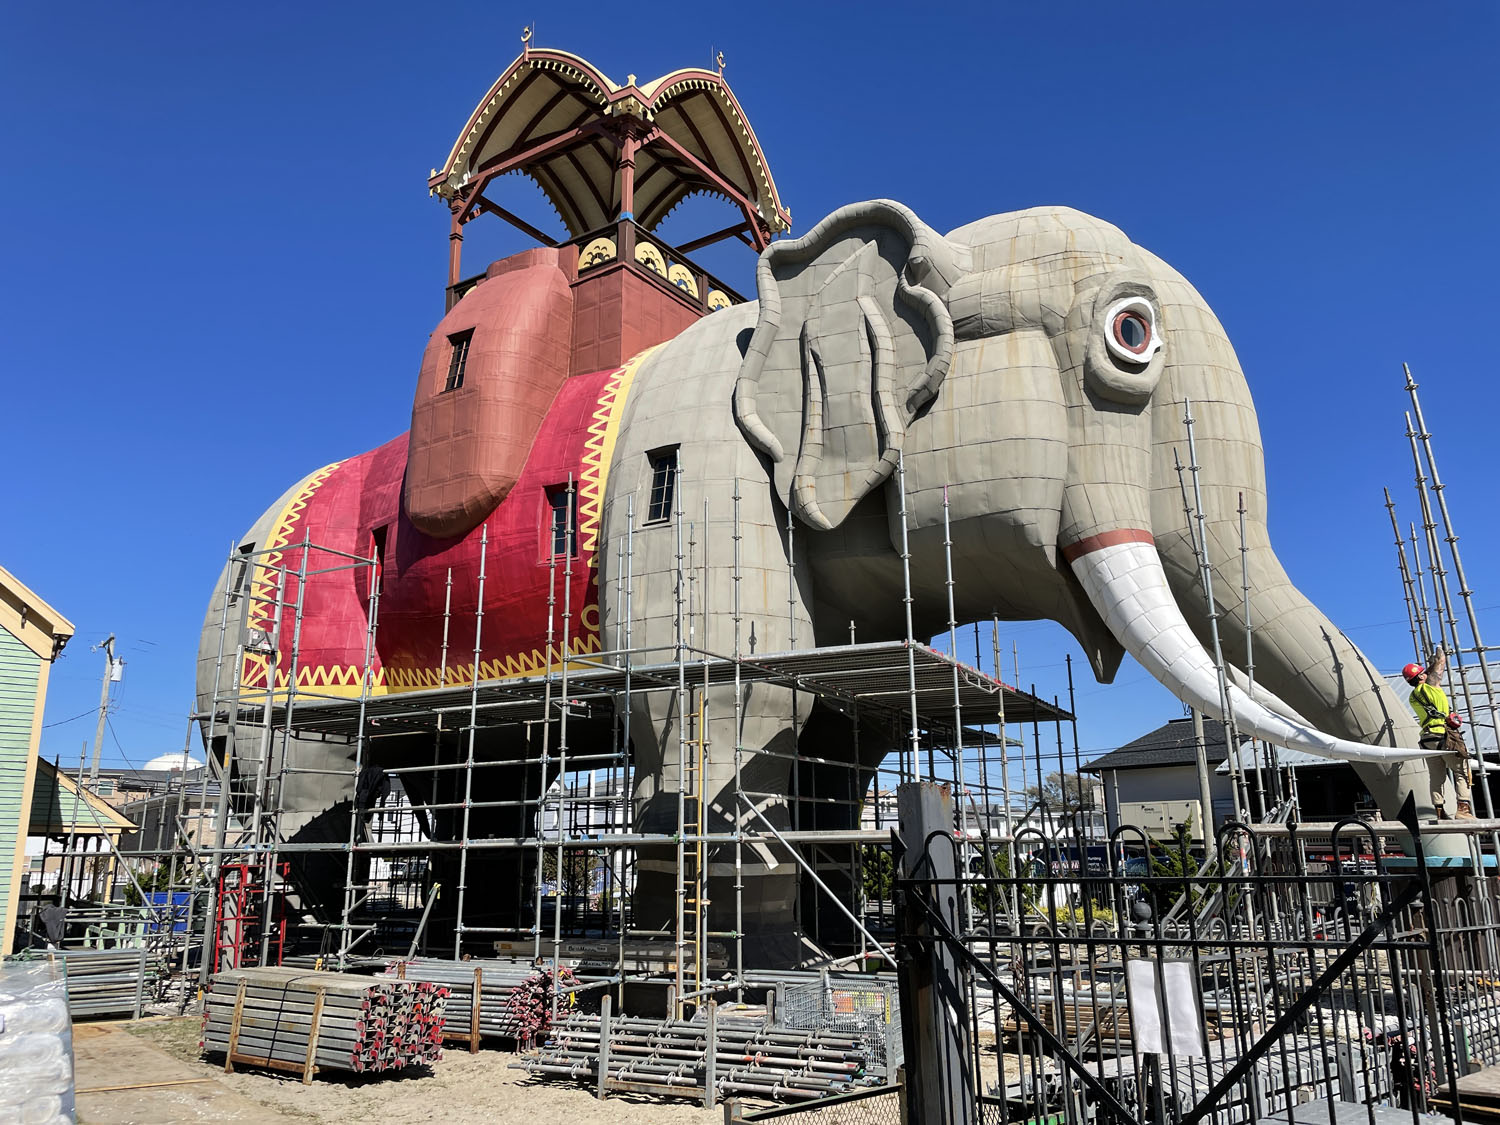 scaffolding, scaffold, lucy the elephant, margate, nj, new jersey, superior scaffold, work deck, historic, restoration